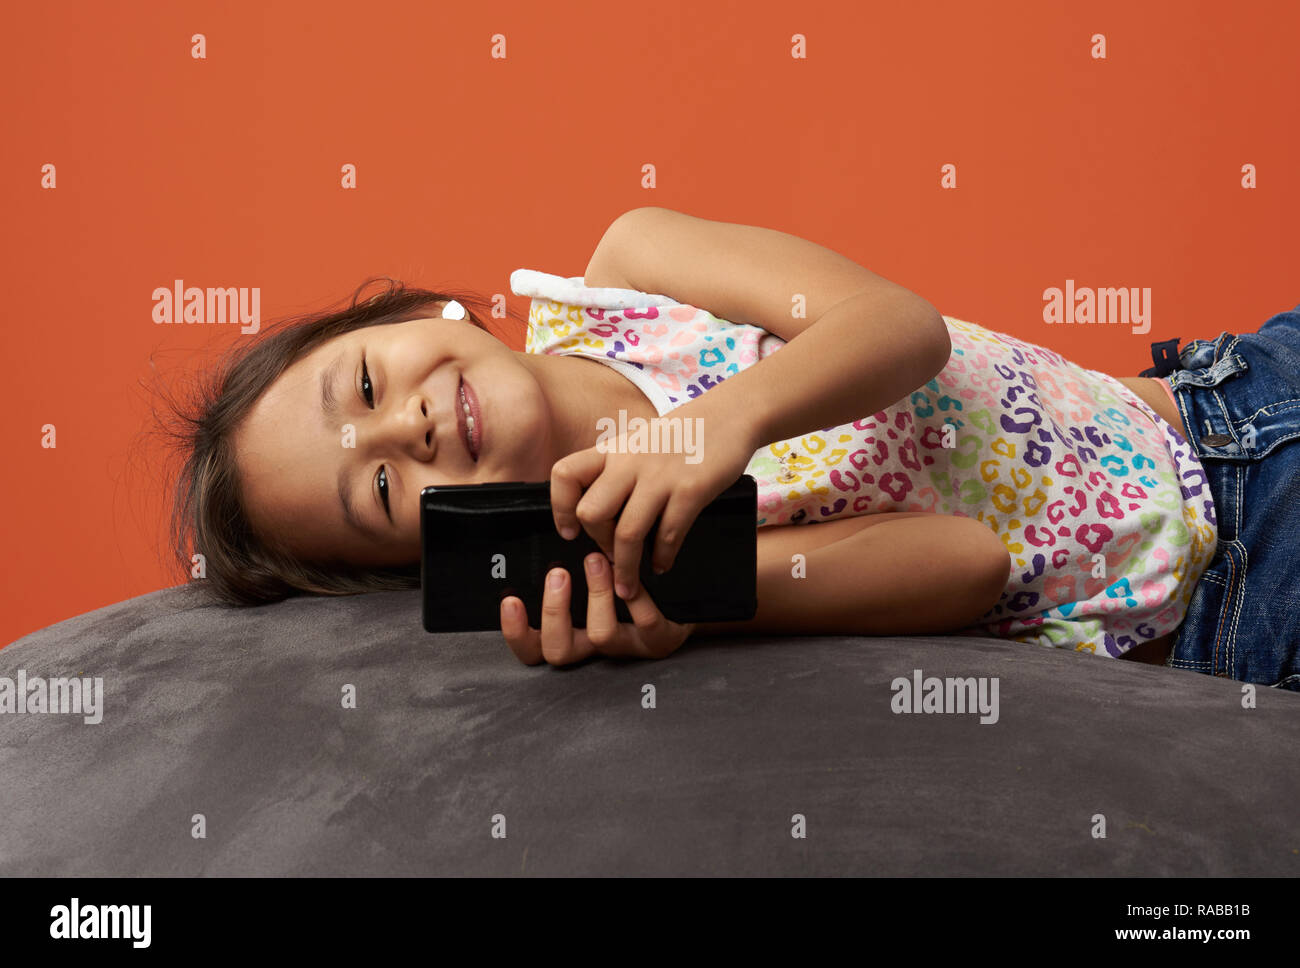 Asian kid smiling with phone in her hands. Kid on a bean bag holding phone. Stock Photo